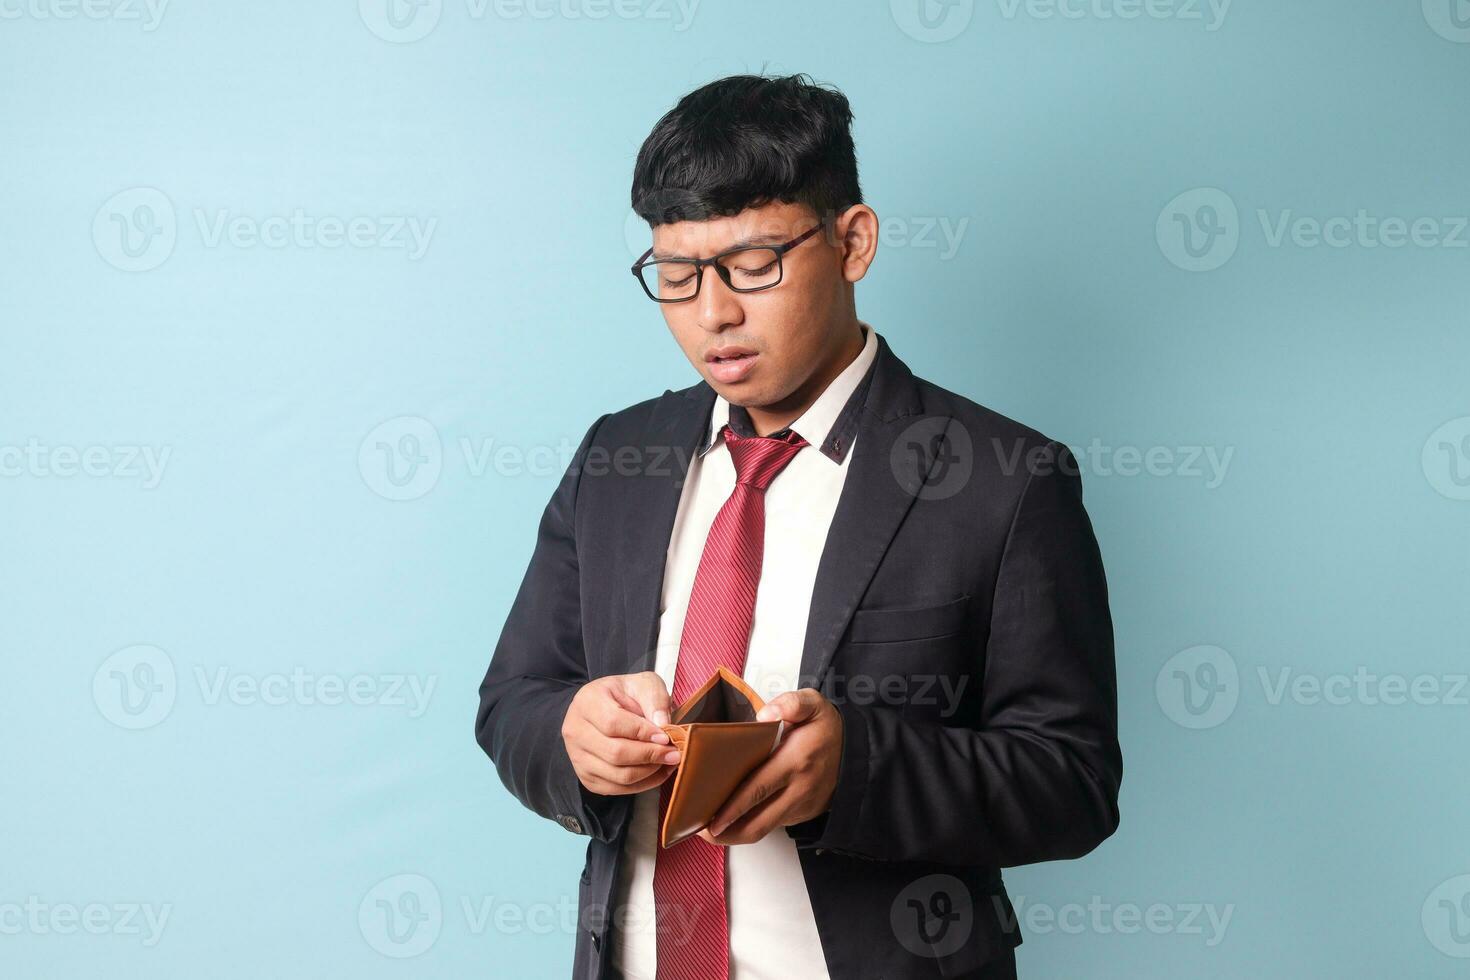 Portrait of young Asian business man in casual suit looked surprised while holding empty leather wallet. Isolated image on blue background photo